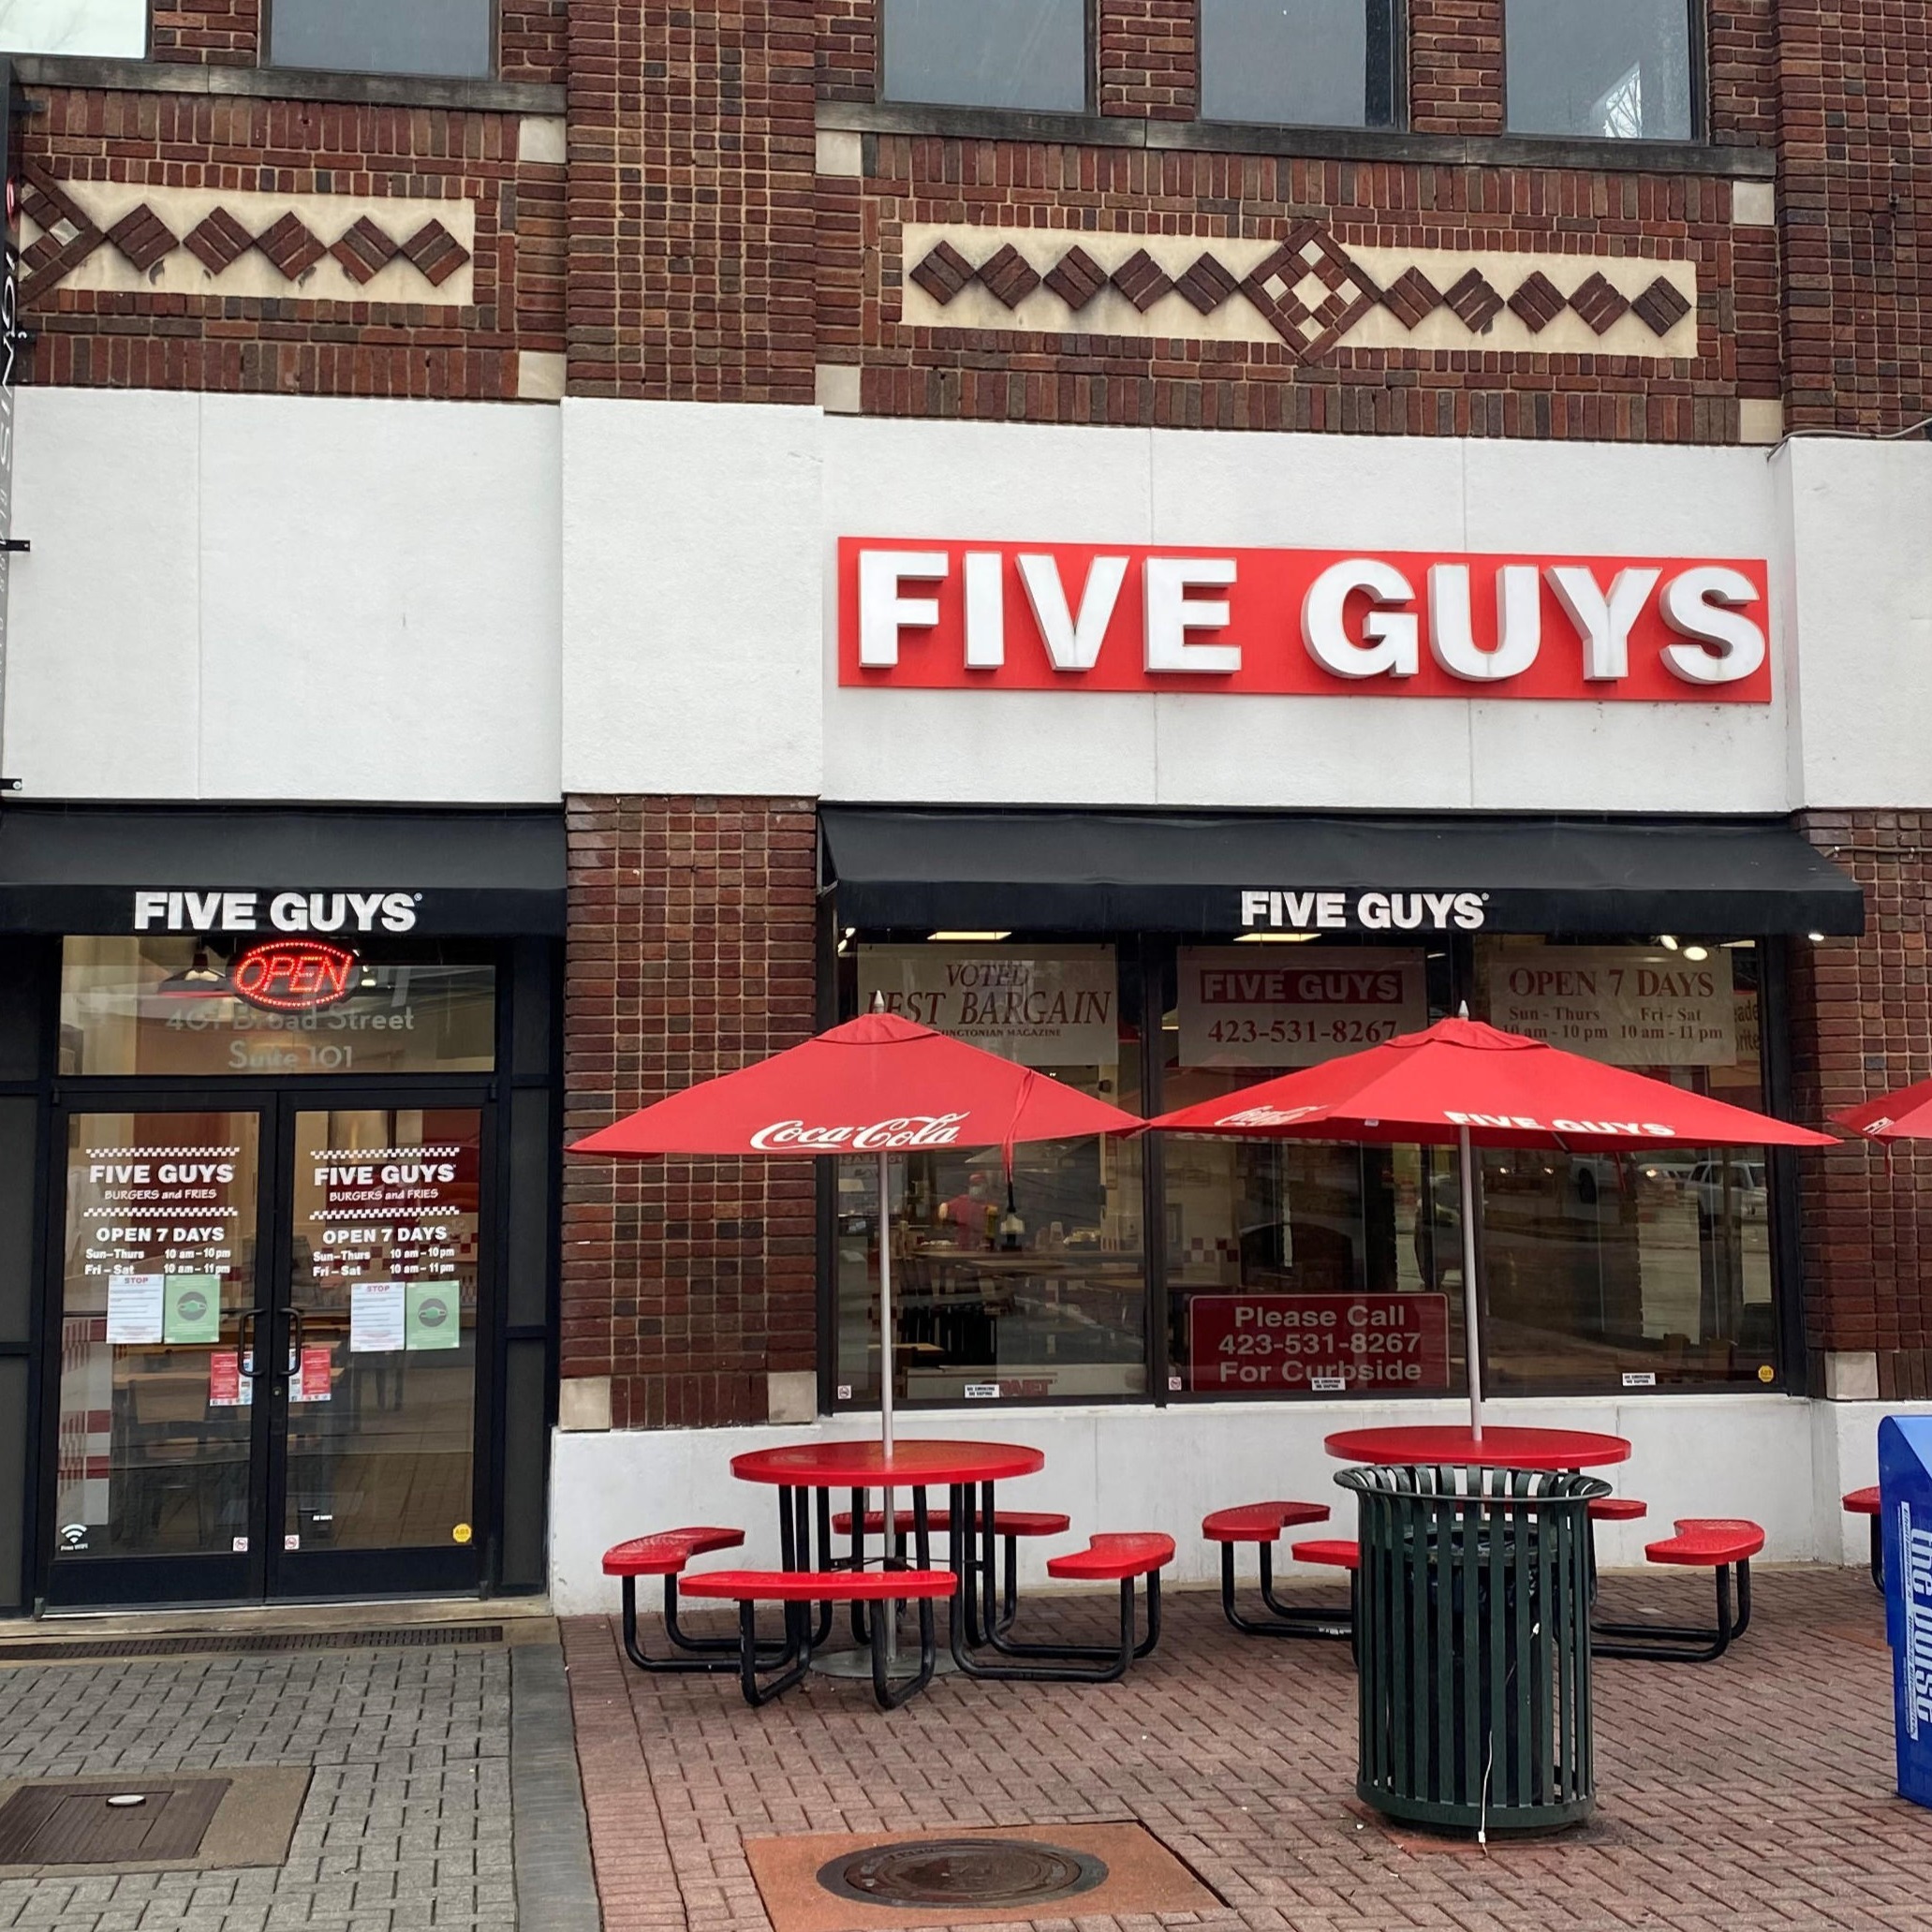 Five Guys at 401 Broad St. in Chattanooga, TN.